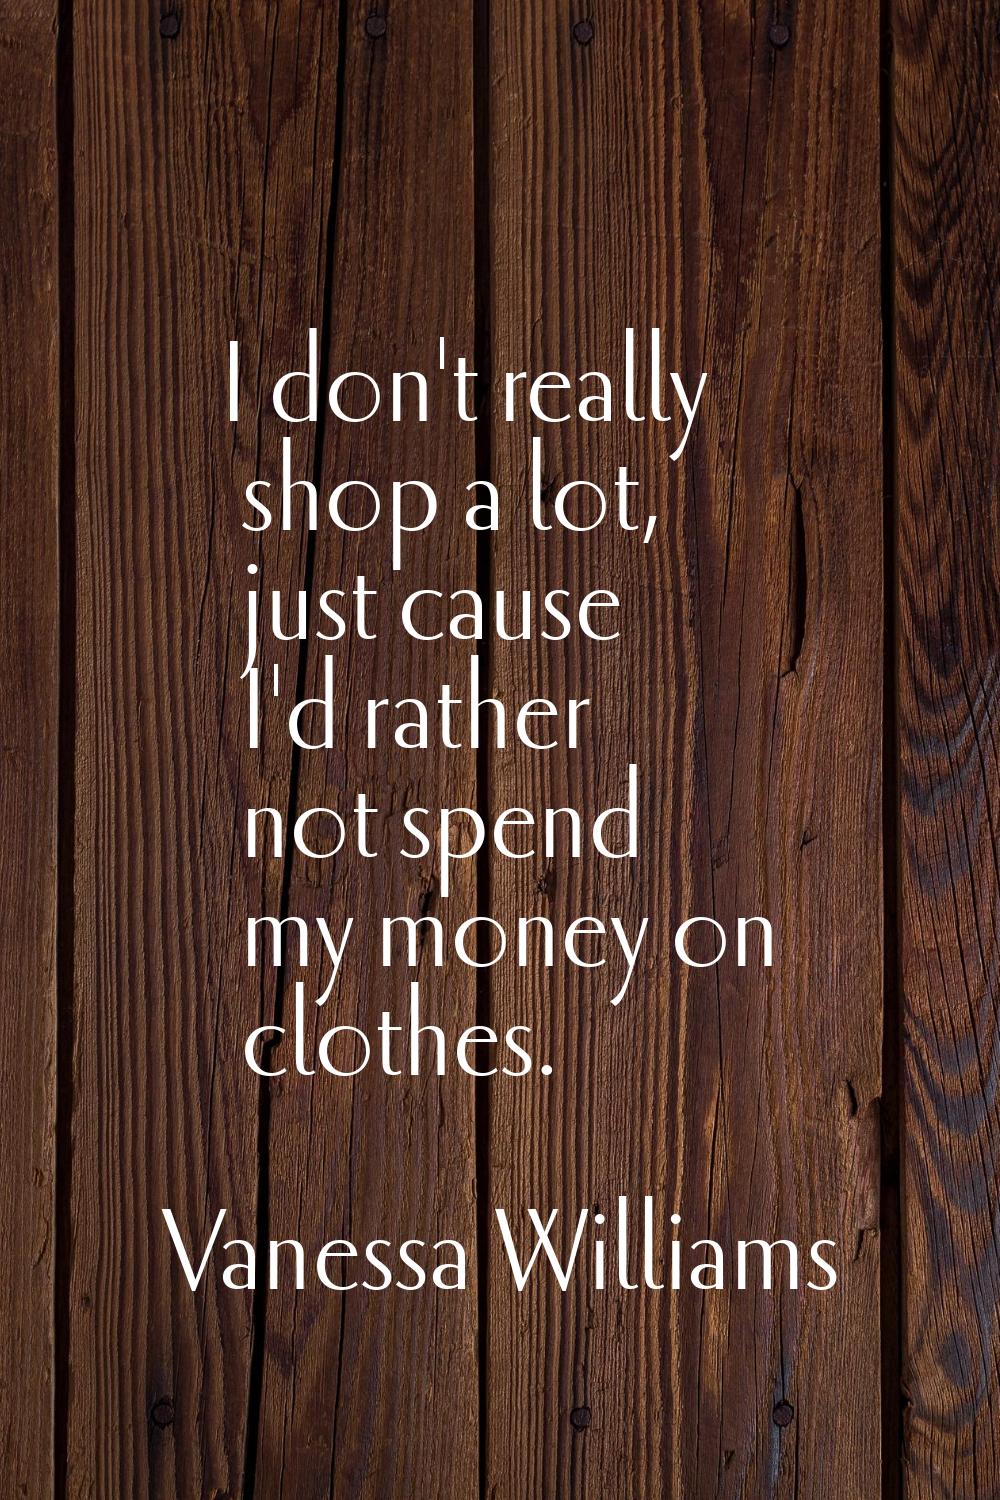 I don't really shop a lot, just cause I'd rather not spend my money on clothes.